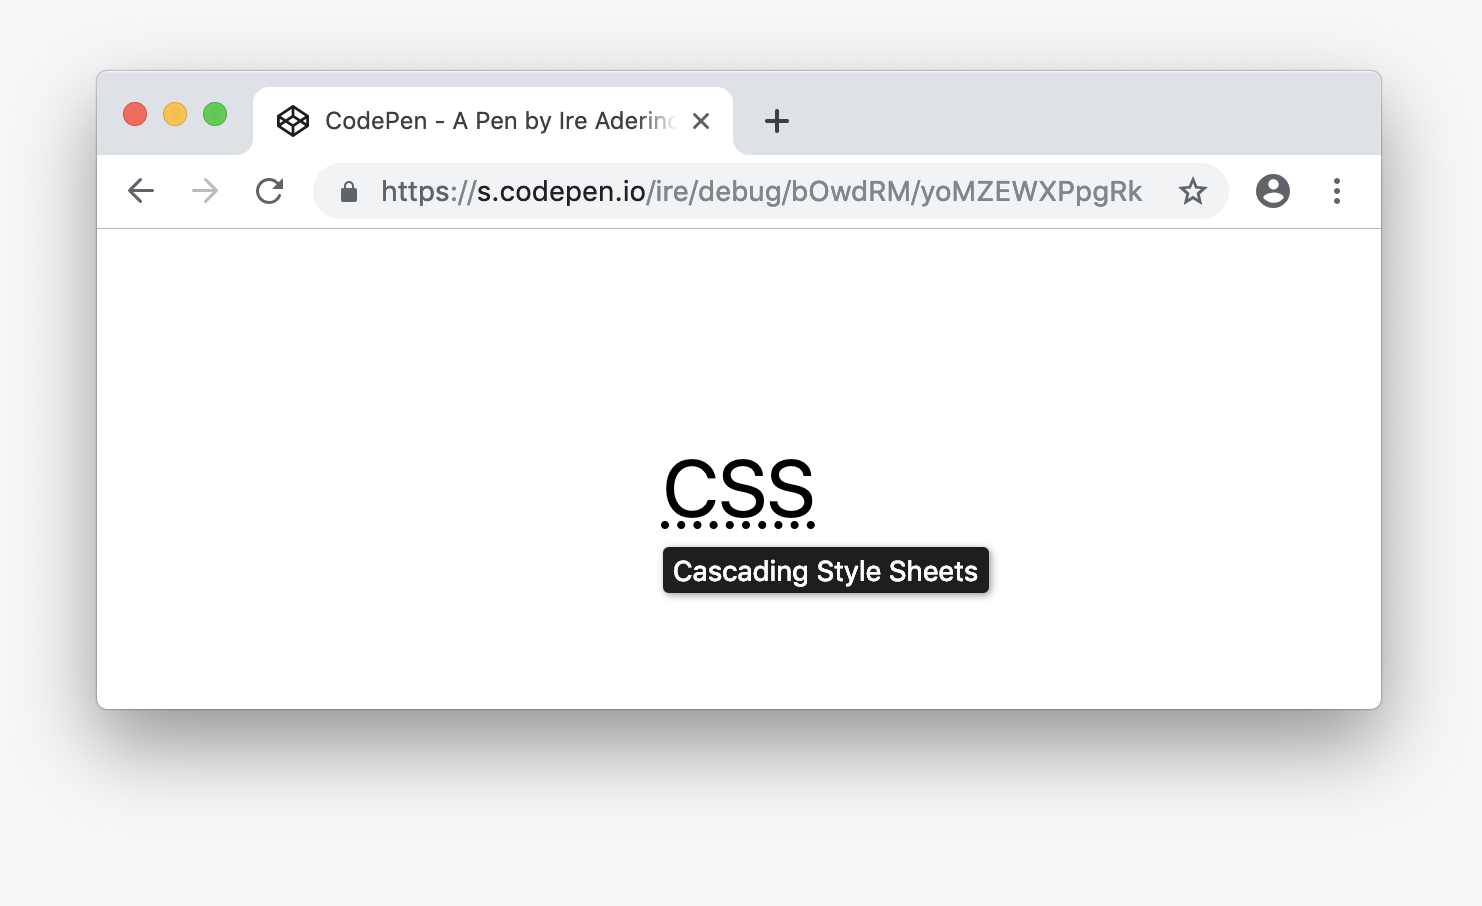 Screenshot of a browser with the word "CSS" and a tooltip below showing "Cascading Style Sheets"